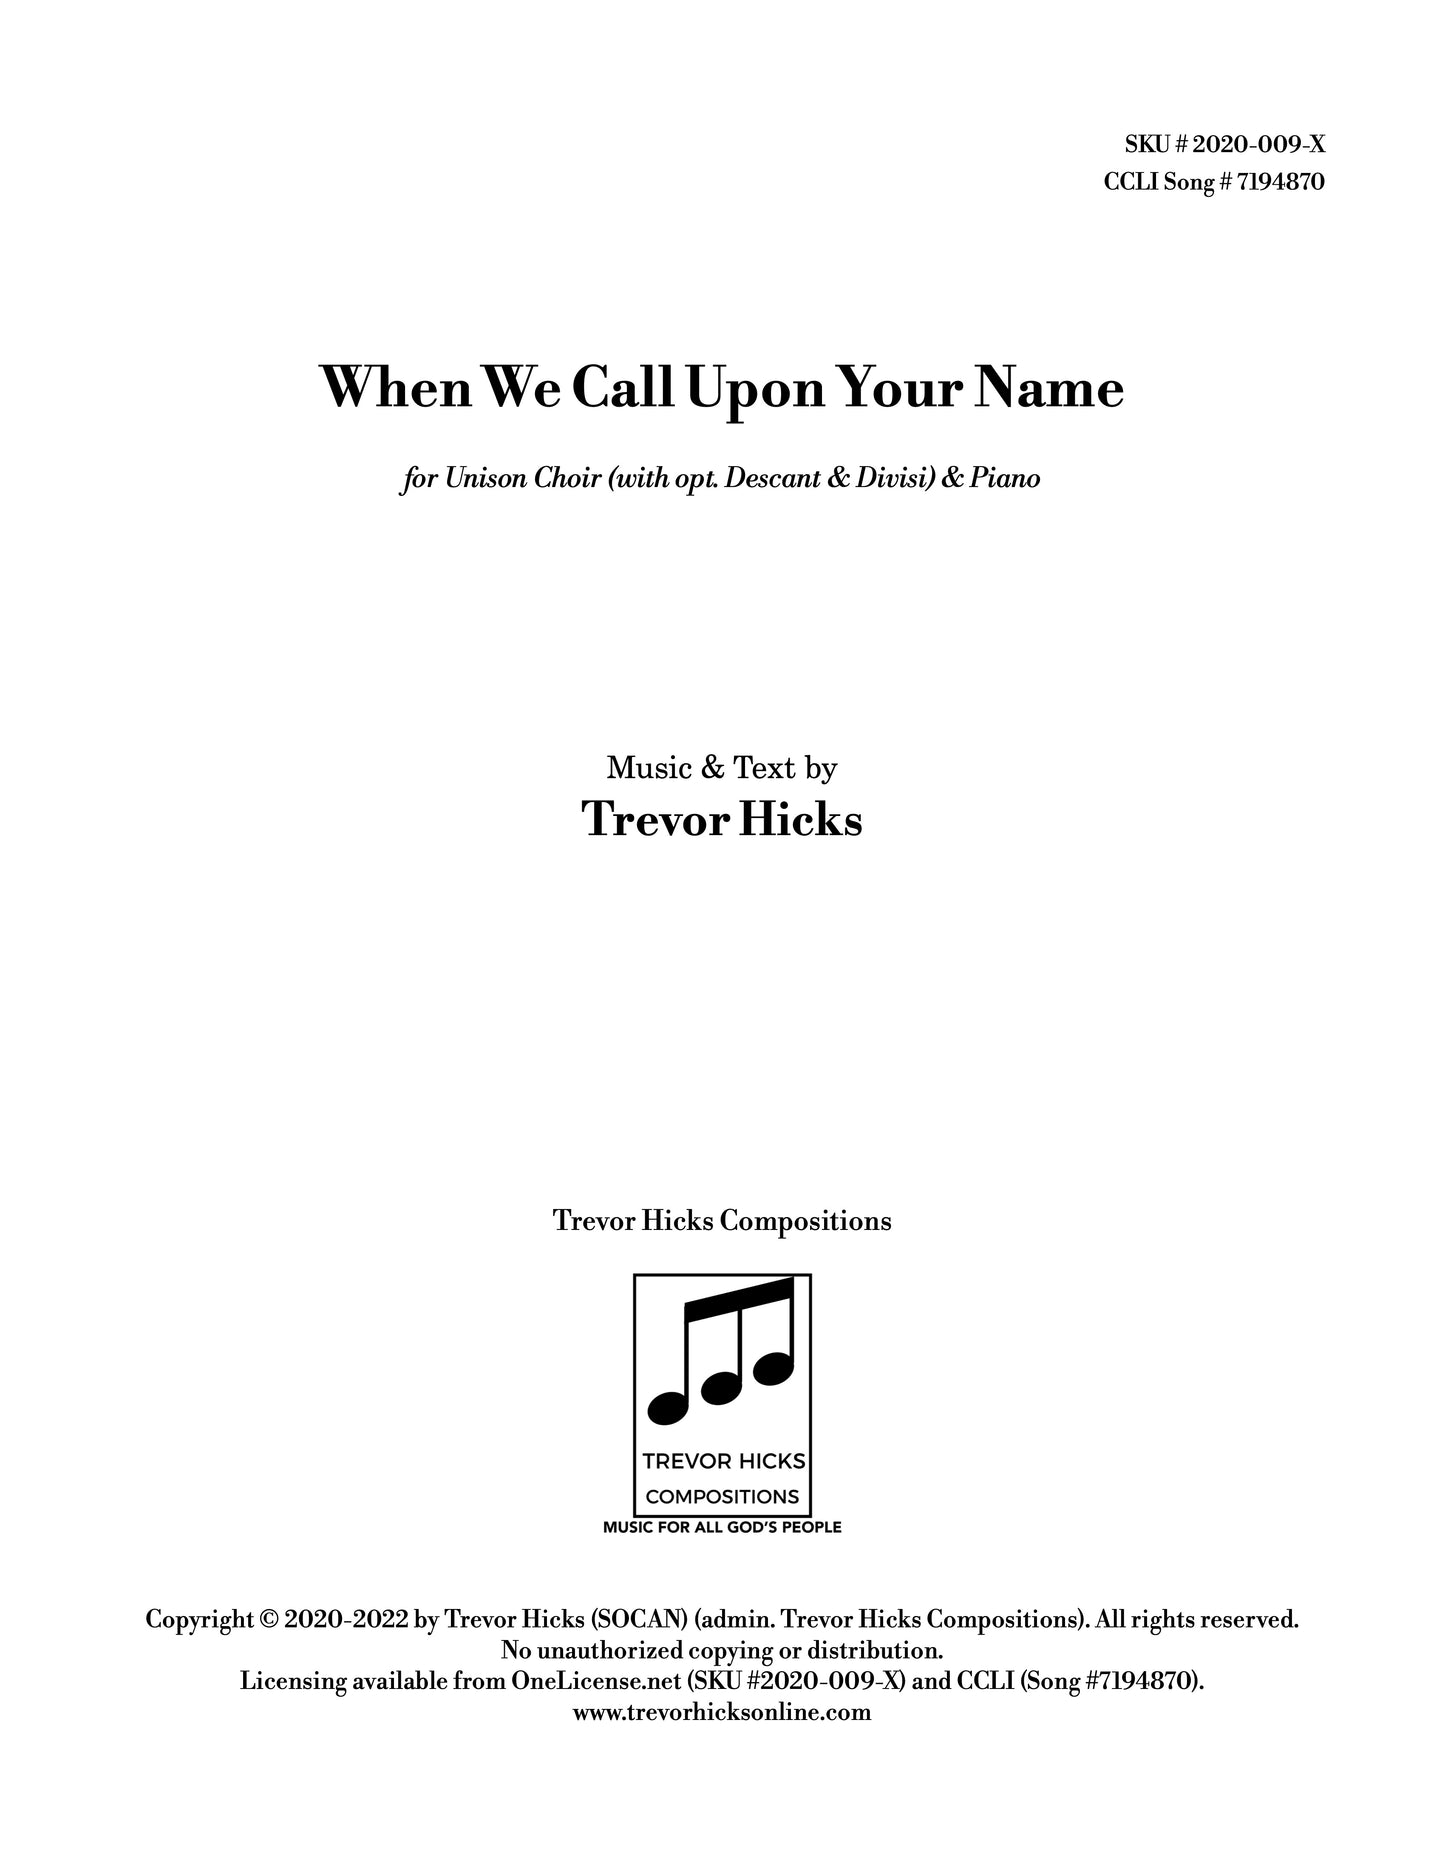 When We Call Upon Your Name